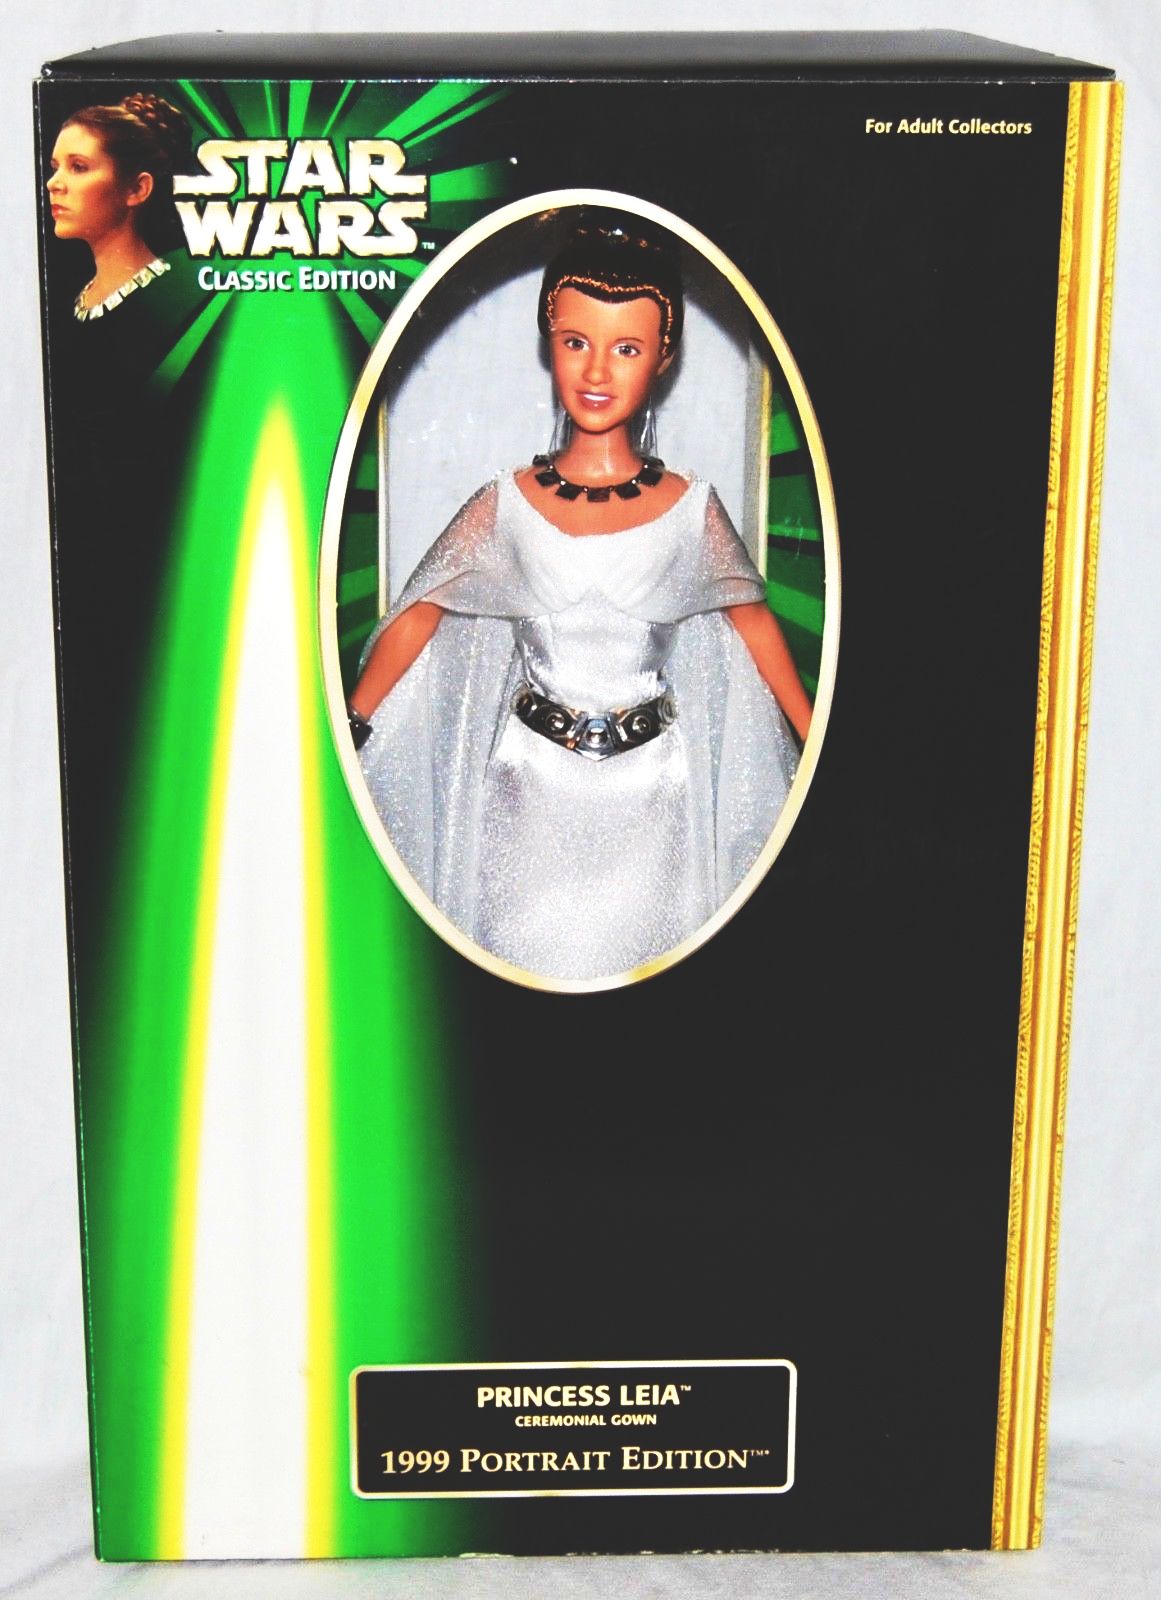 Hasbro Star Wars Princess Leia In Ceremonial Gown 1999 Portrait Edition Action Figure for sale online 